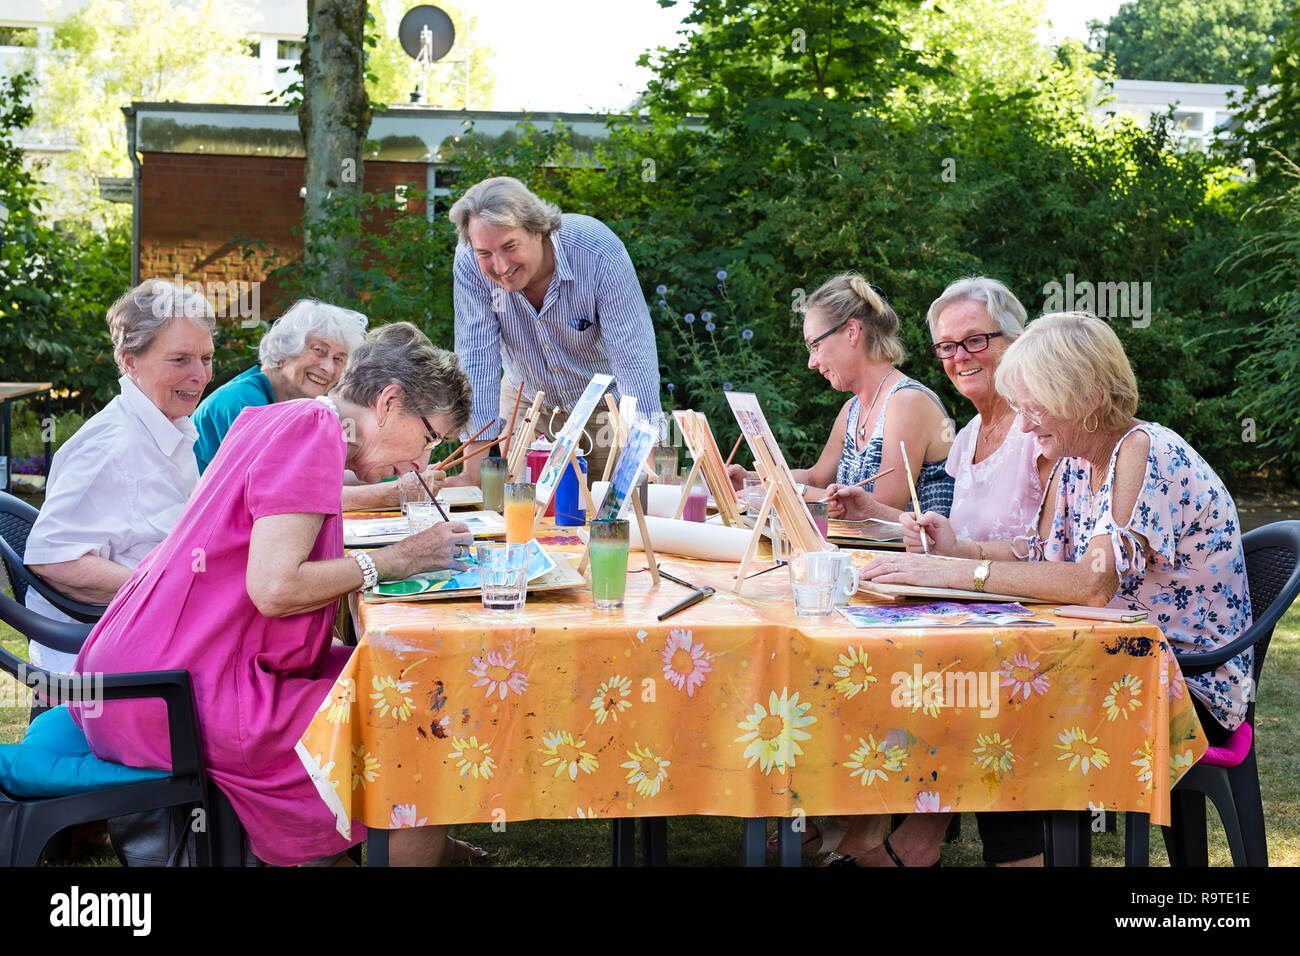 Male artist giving art lessons to the group of senior women, practicing in painting pictures sitting at one table outdoors in backyard. Stock Photo